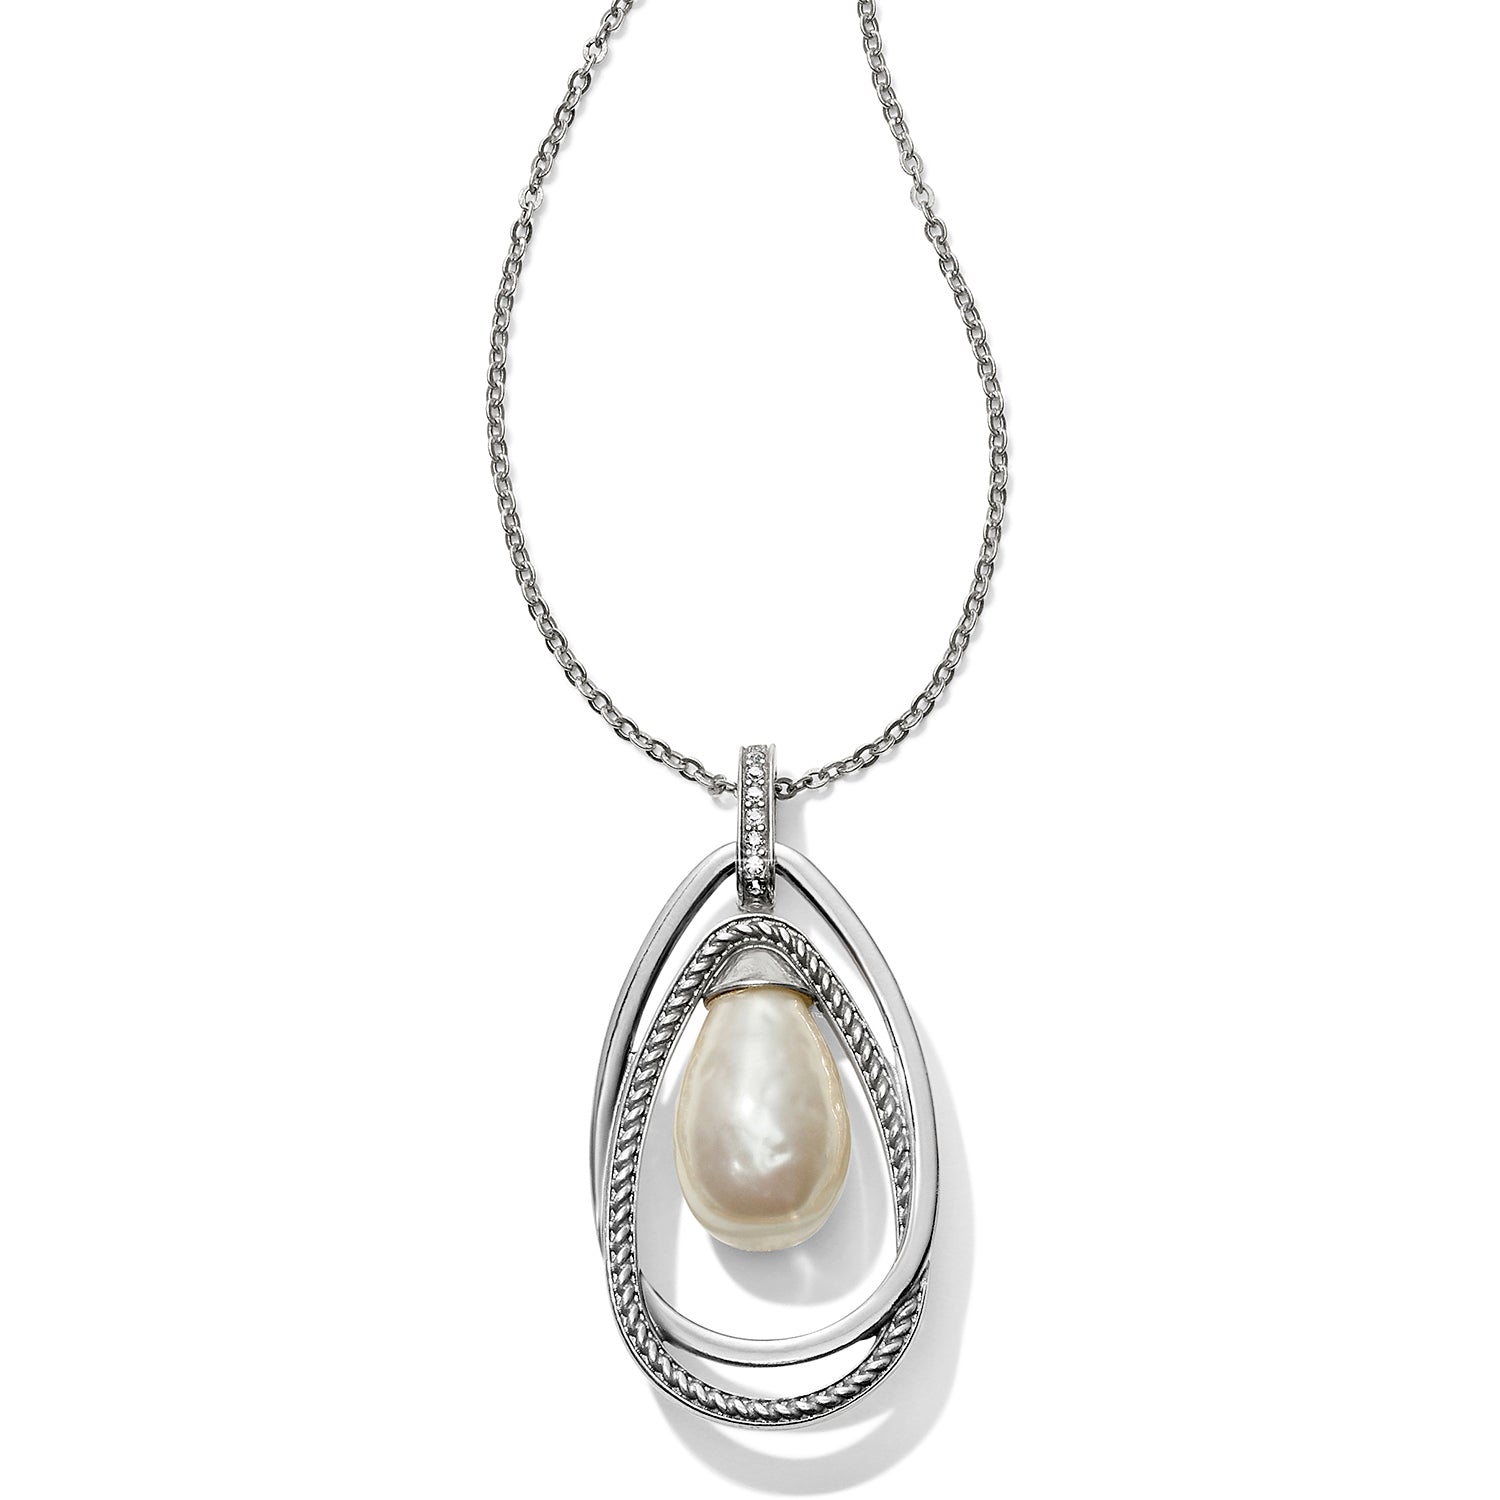 Neptune's Rings Pearl Pendant Necklace